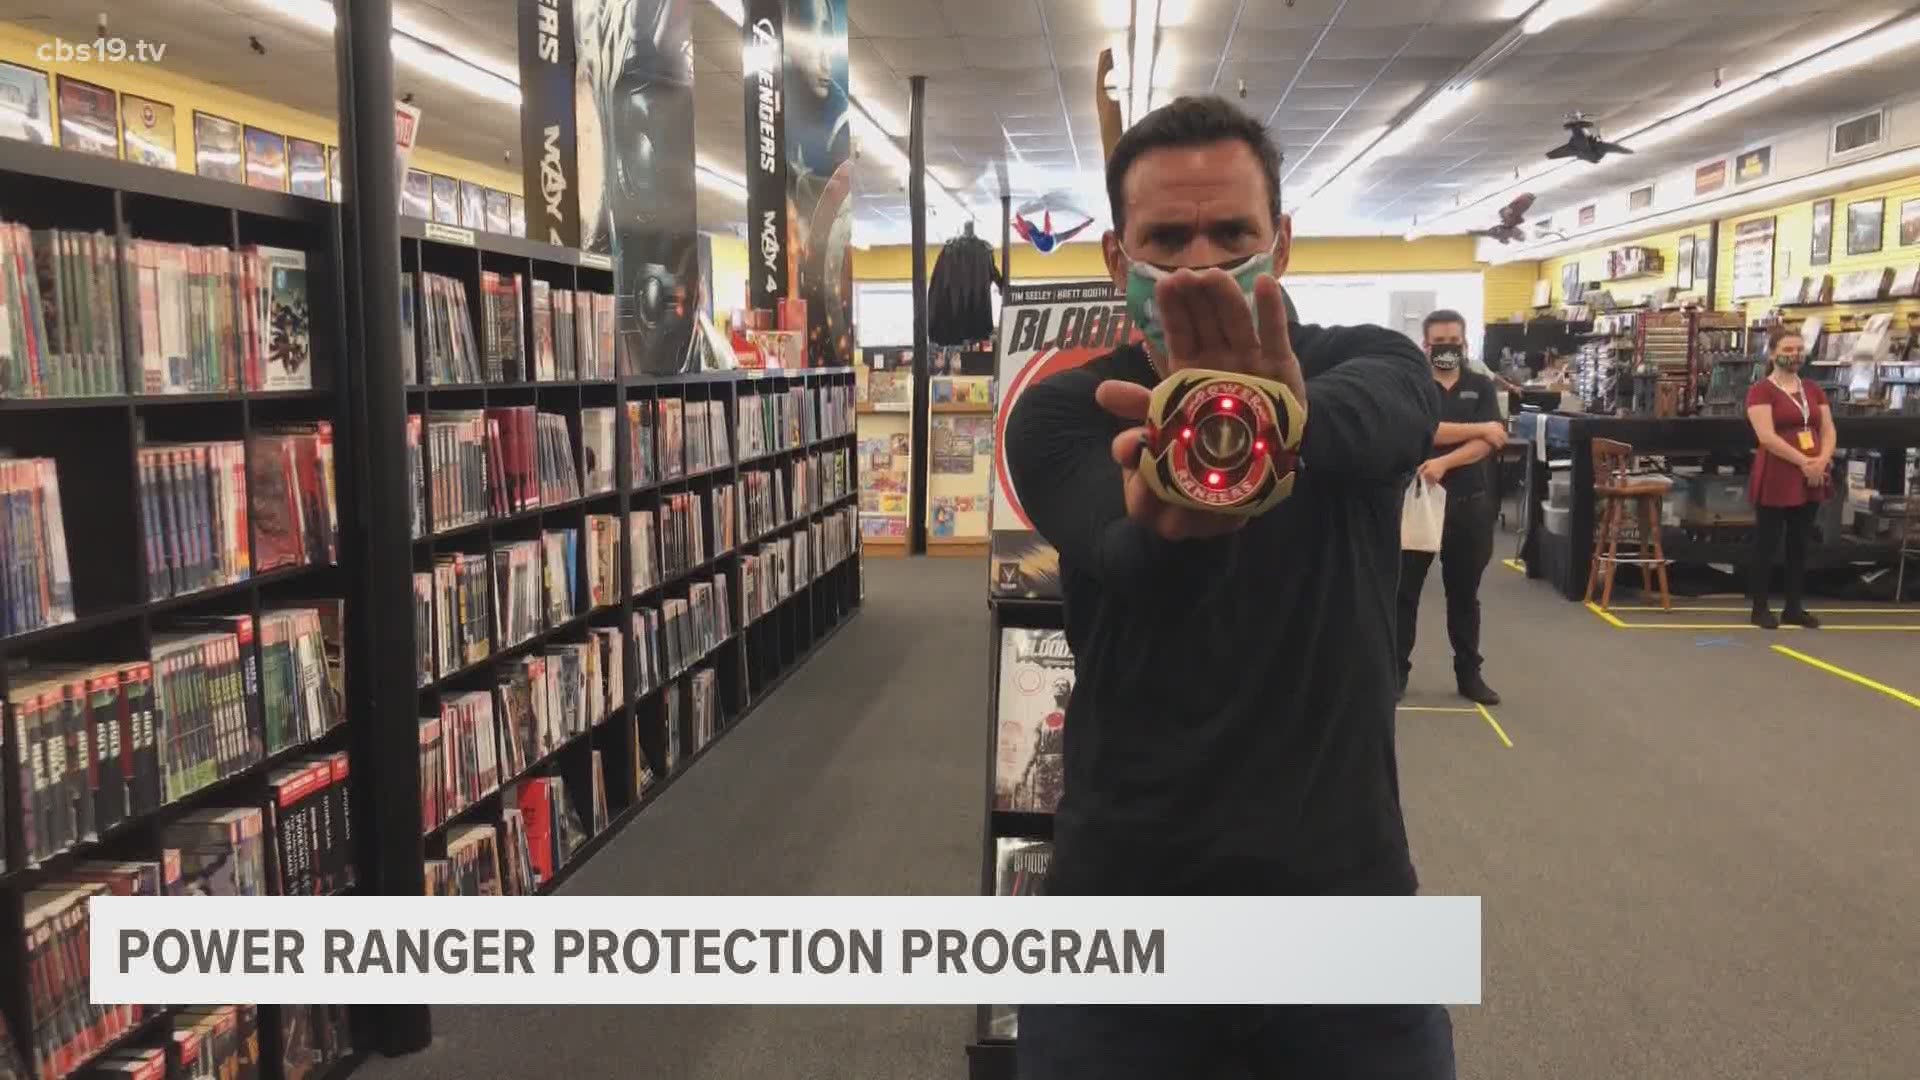 Former Power Rangers star Jason David Frank created the Power Ranger Protection Program to help bring business to comic shops who have been affected by COVID-19.